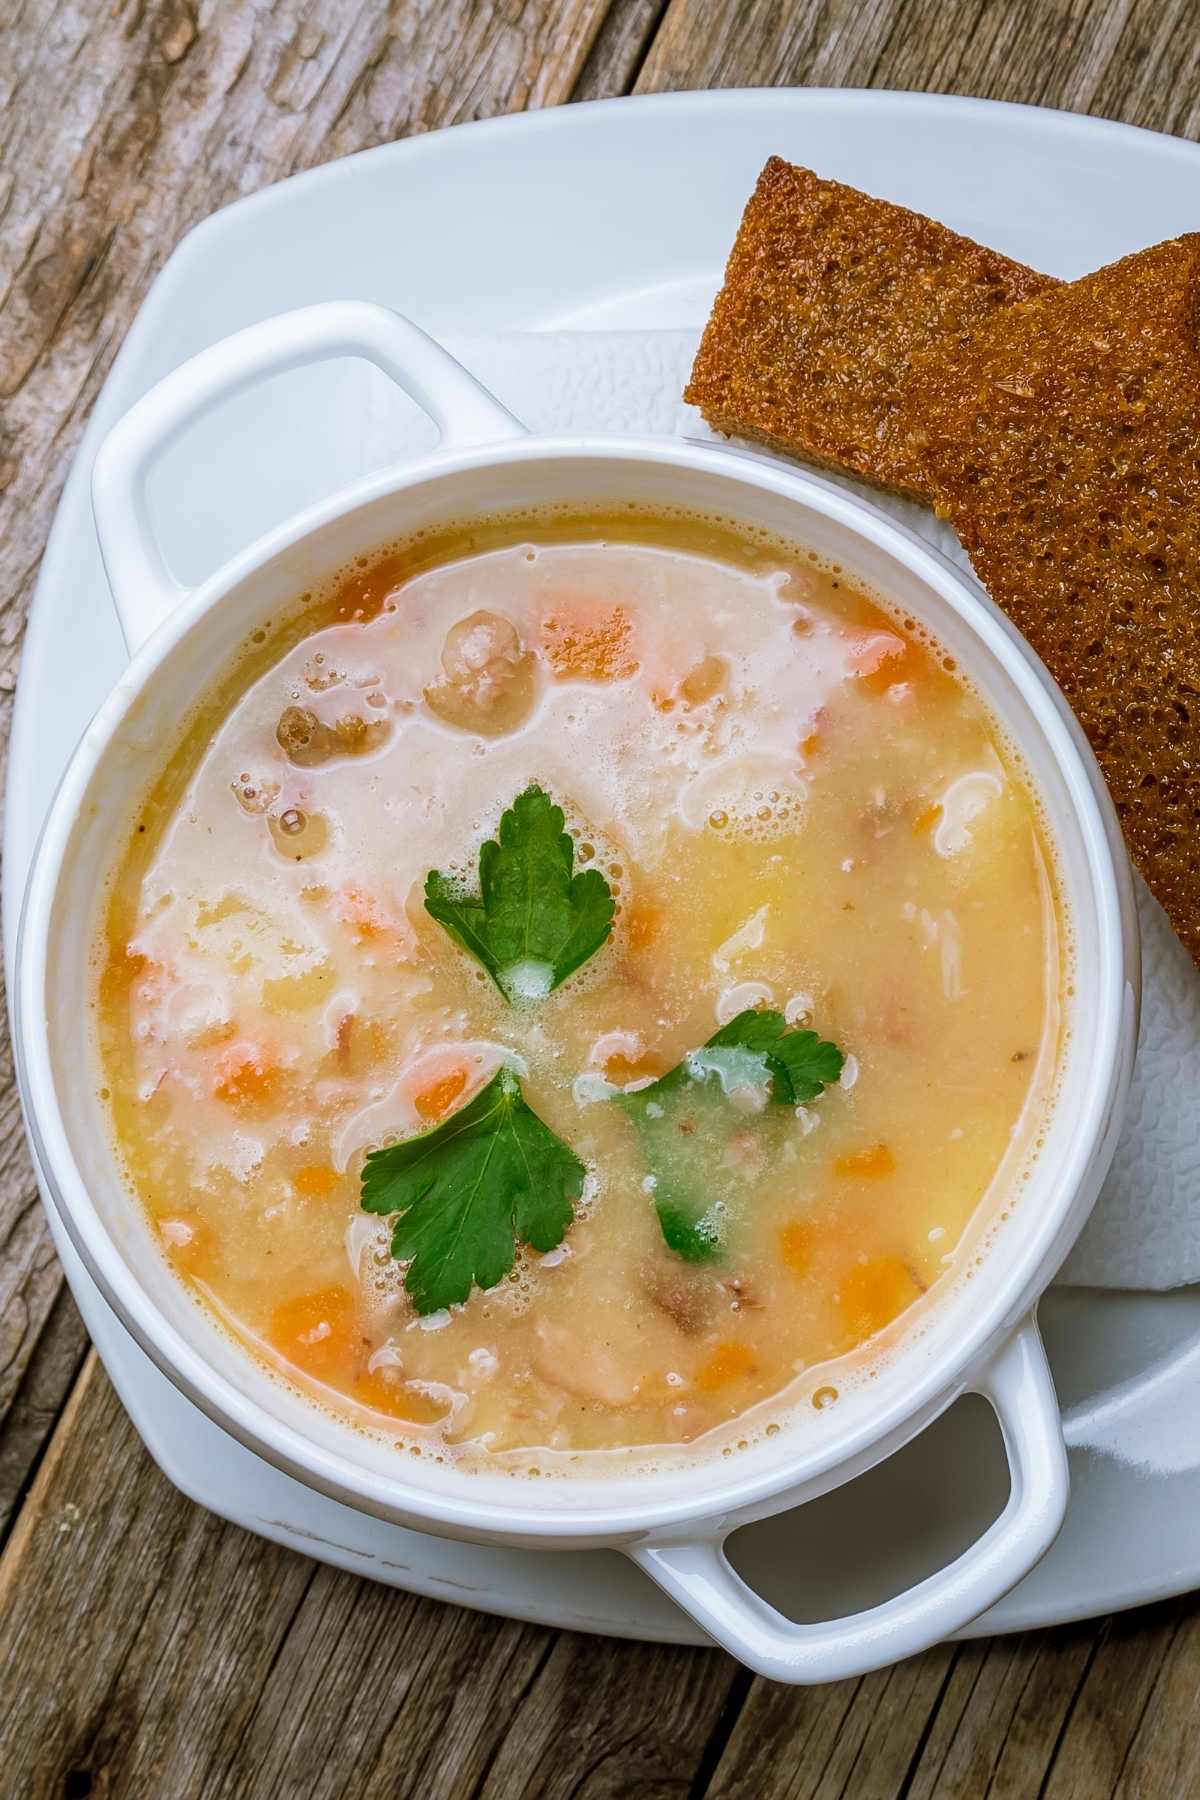 If you have some leftover baked ham from the holidays, this homemade ham soup is the perfect dish to make. It’s easy to prepare and has great flavor.